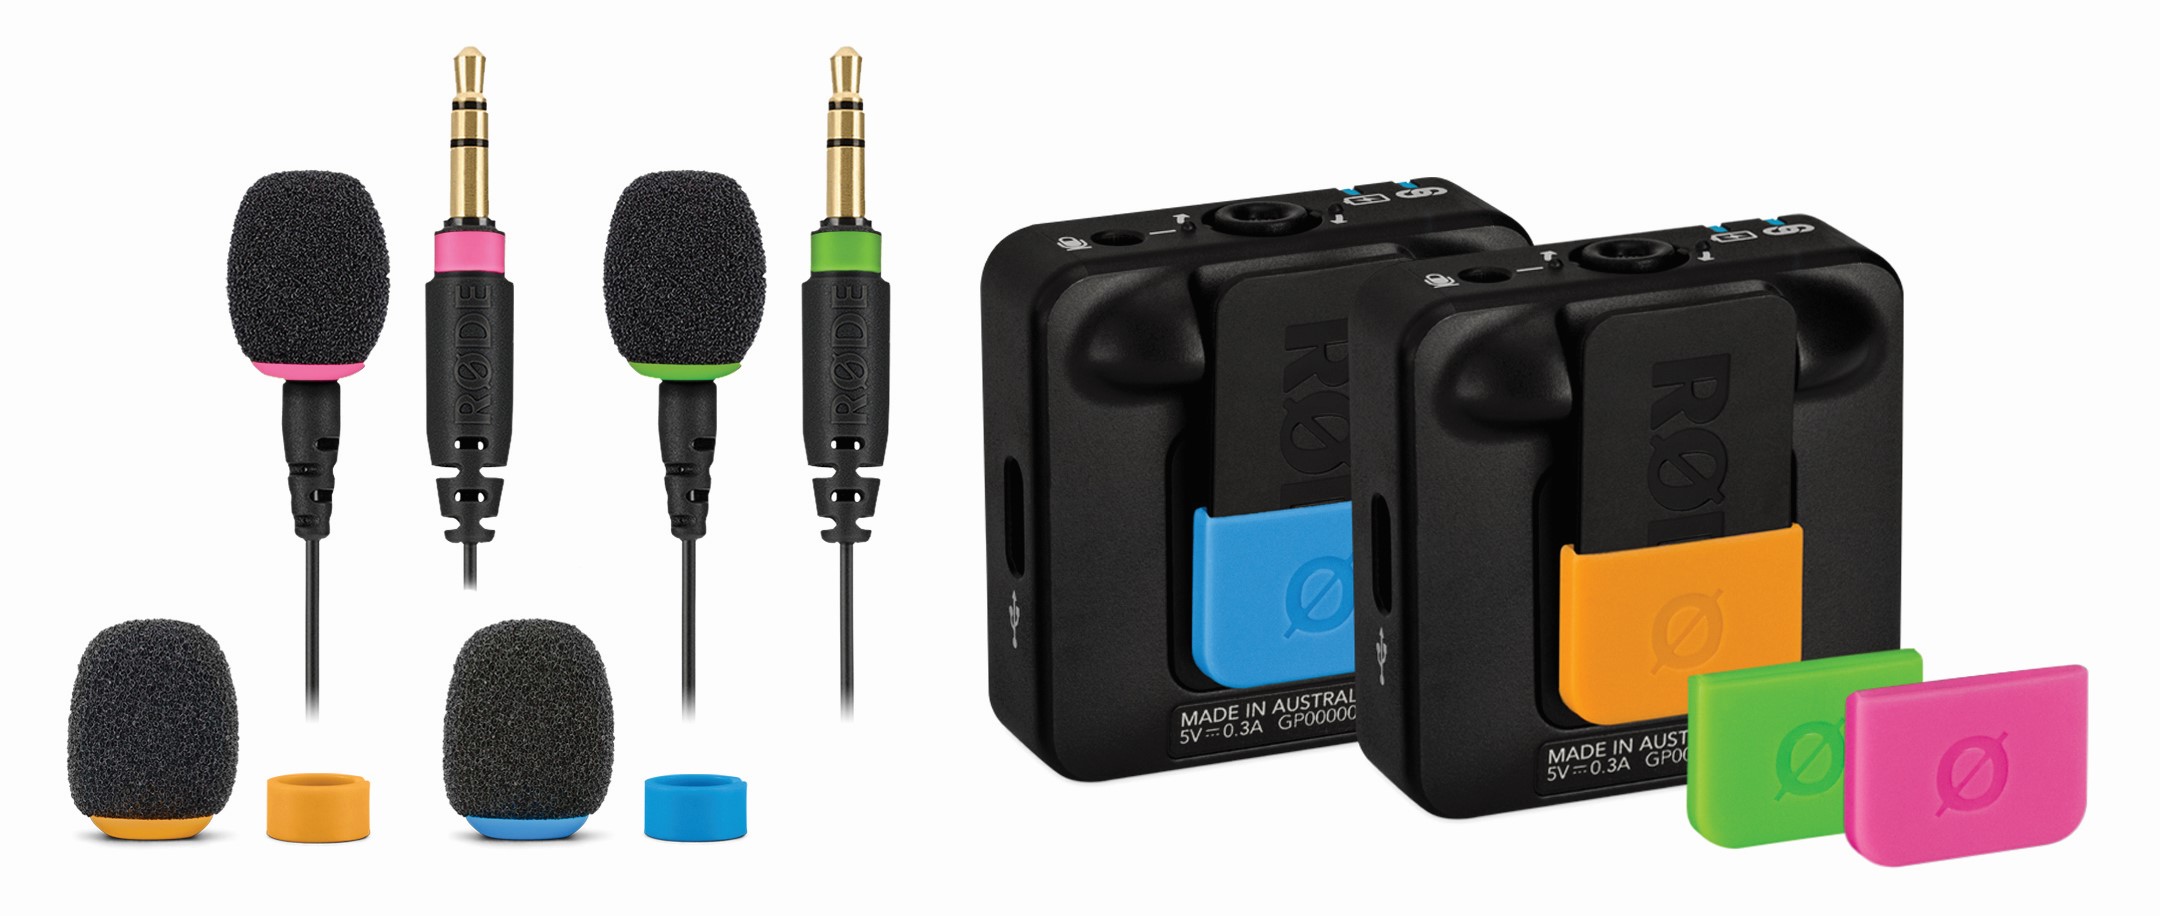 RØDE launches new accessories for Wireless GO, GO II and the Lavalier GO microphone